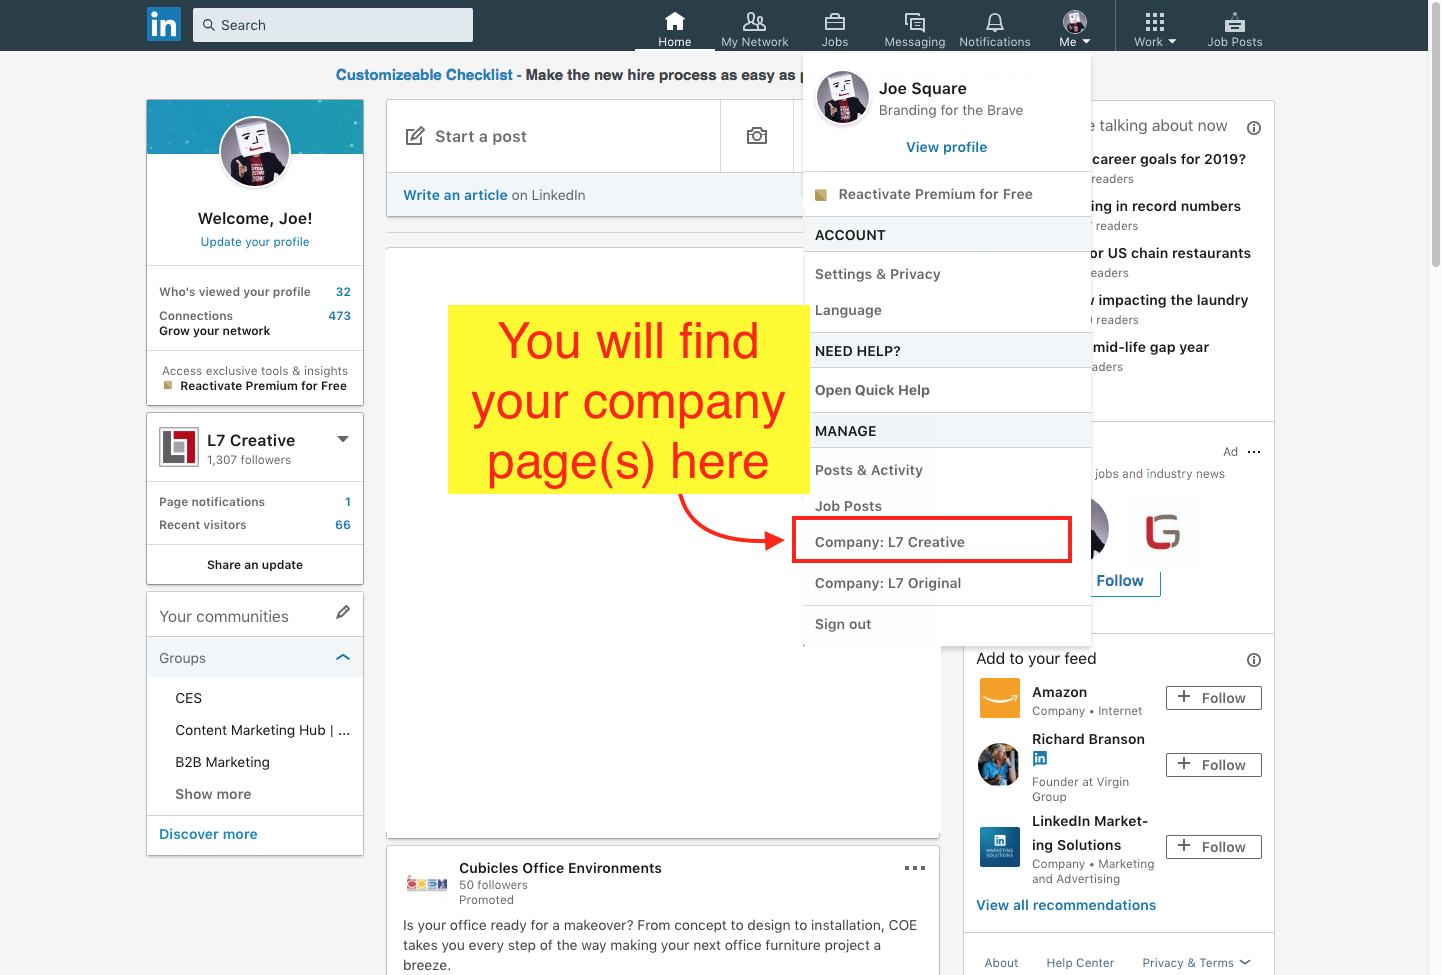 How to Find an Existing LinkedIn Company Page - Step 3 Screenshot